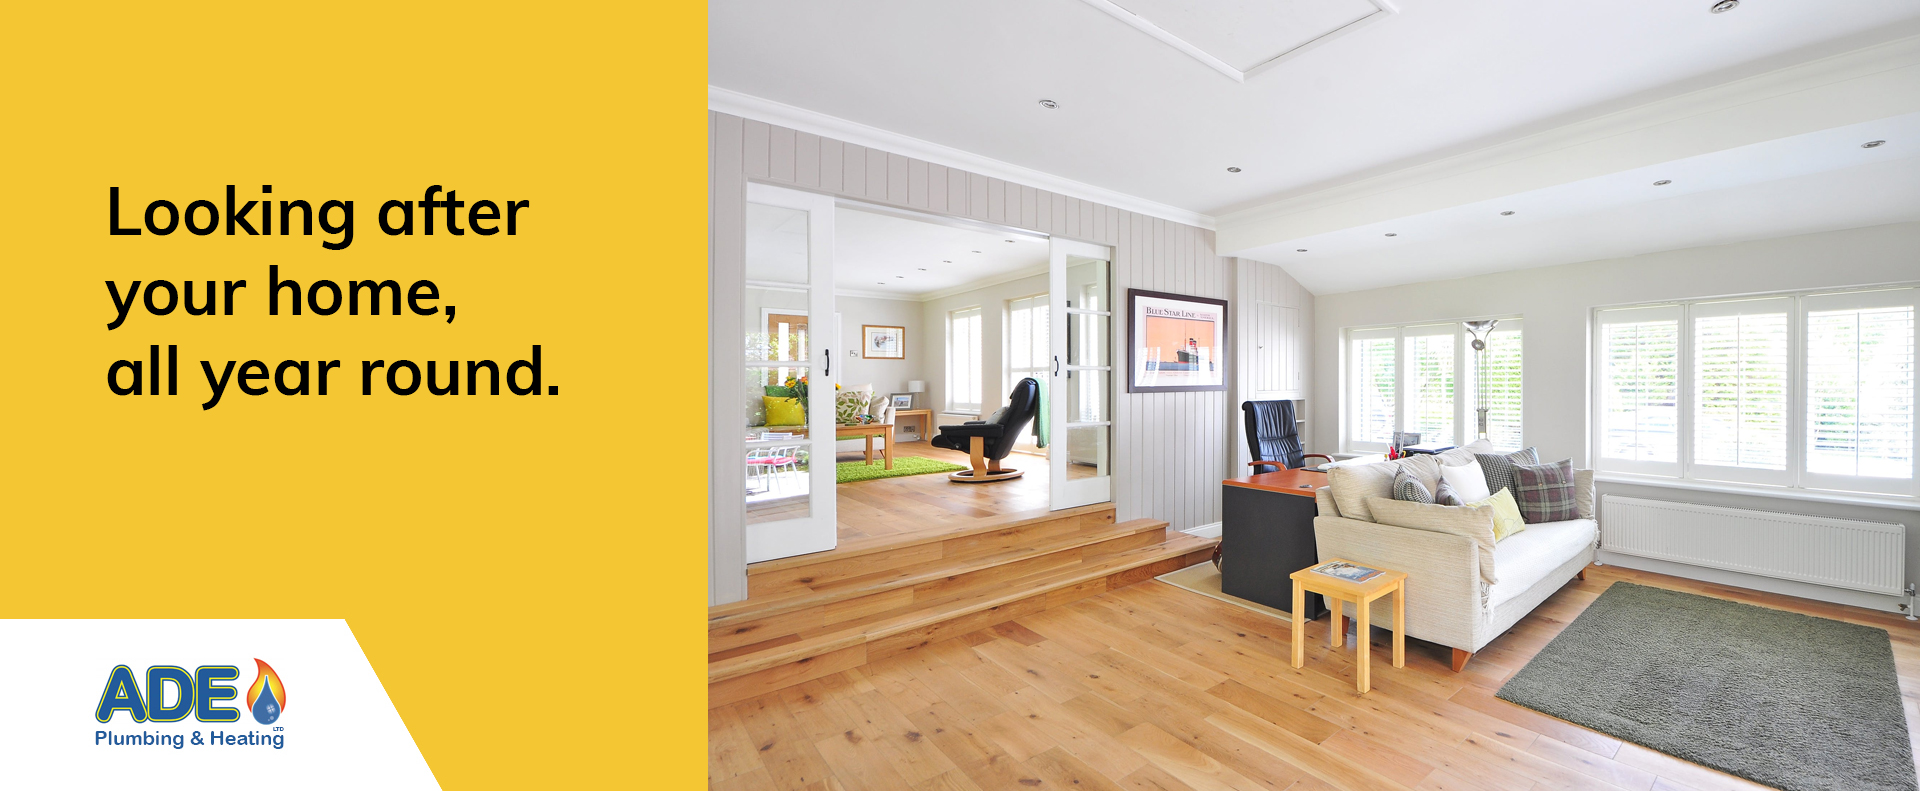 ADE Pluming and Heating, Manchester - Taking care of your home this winter